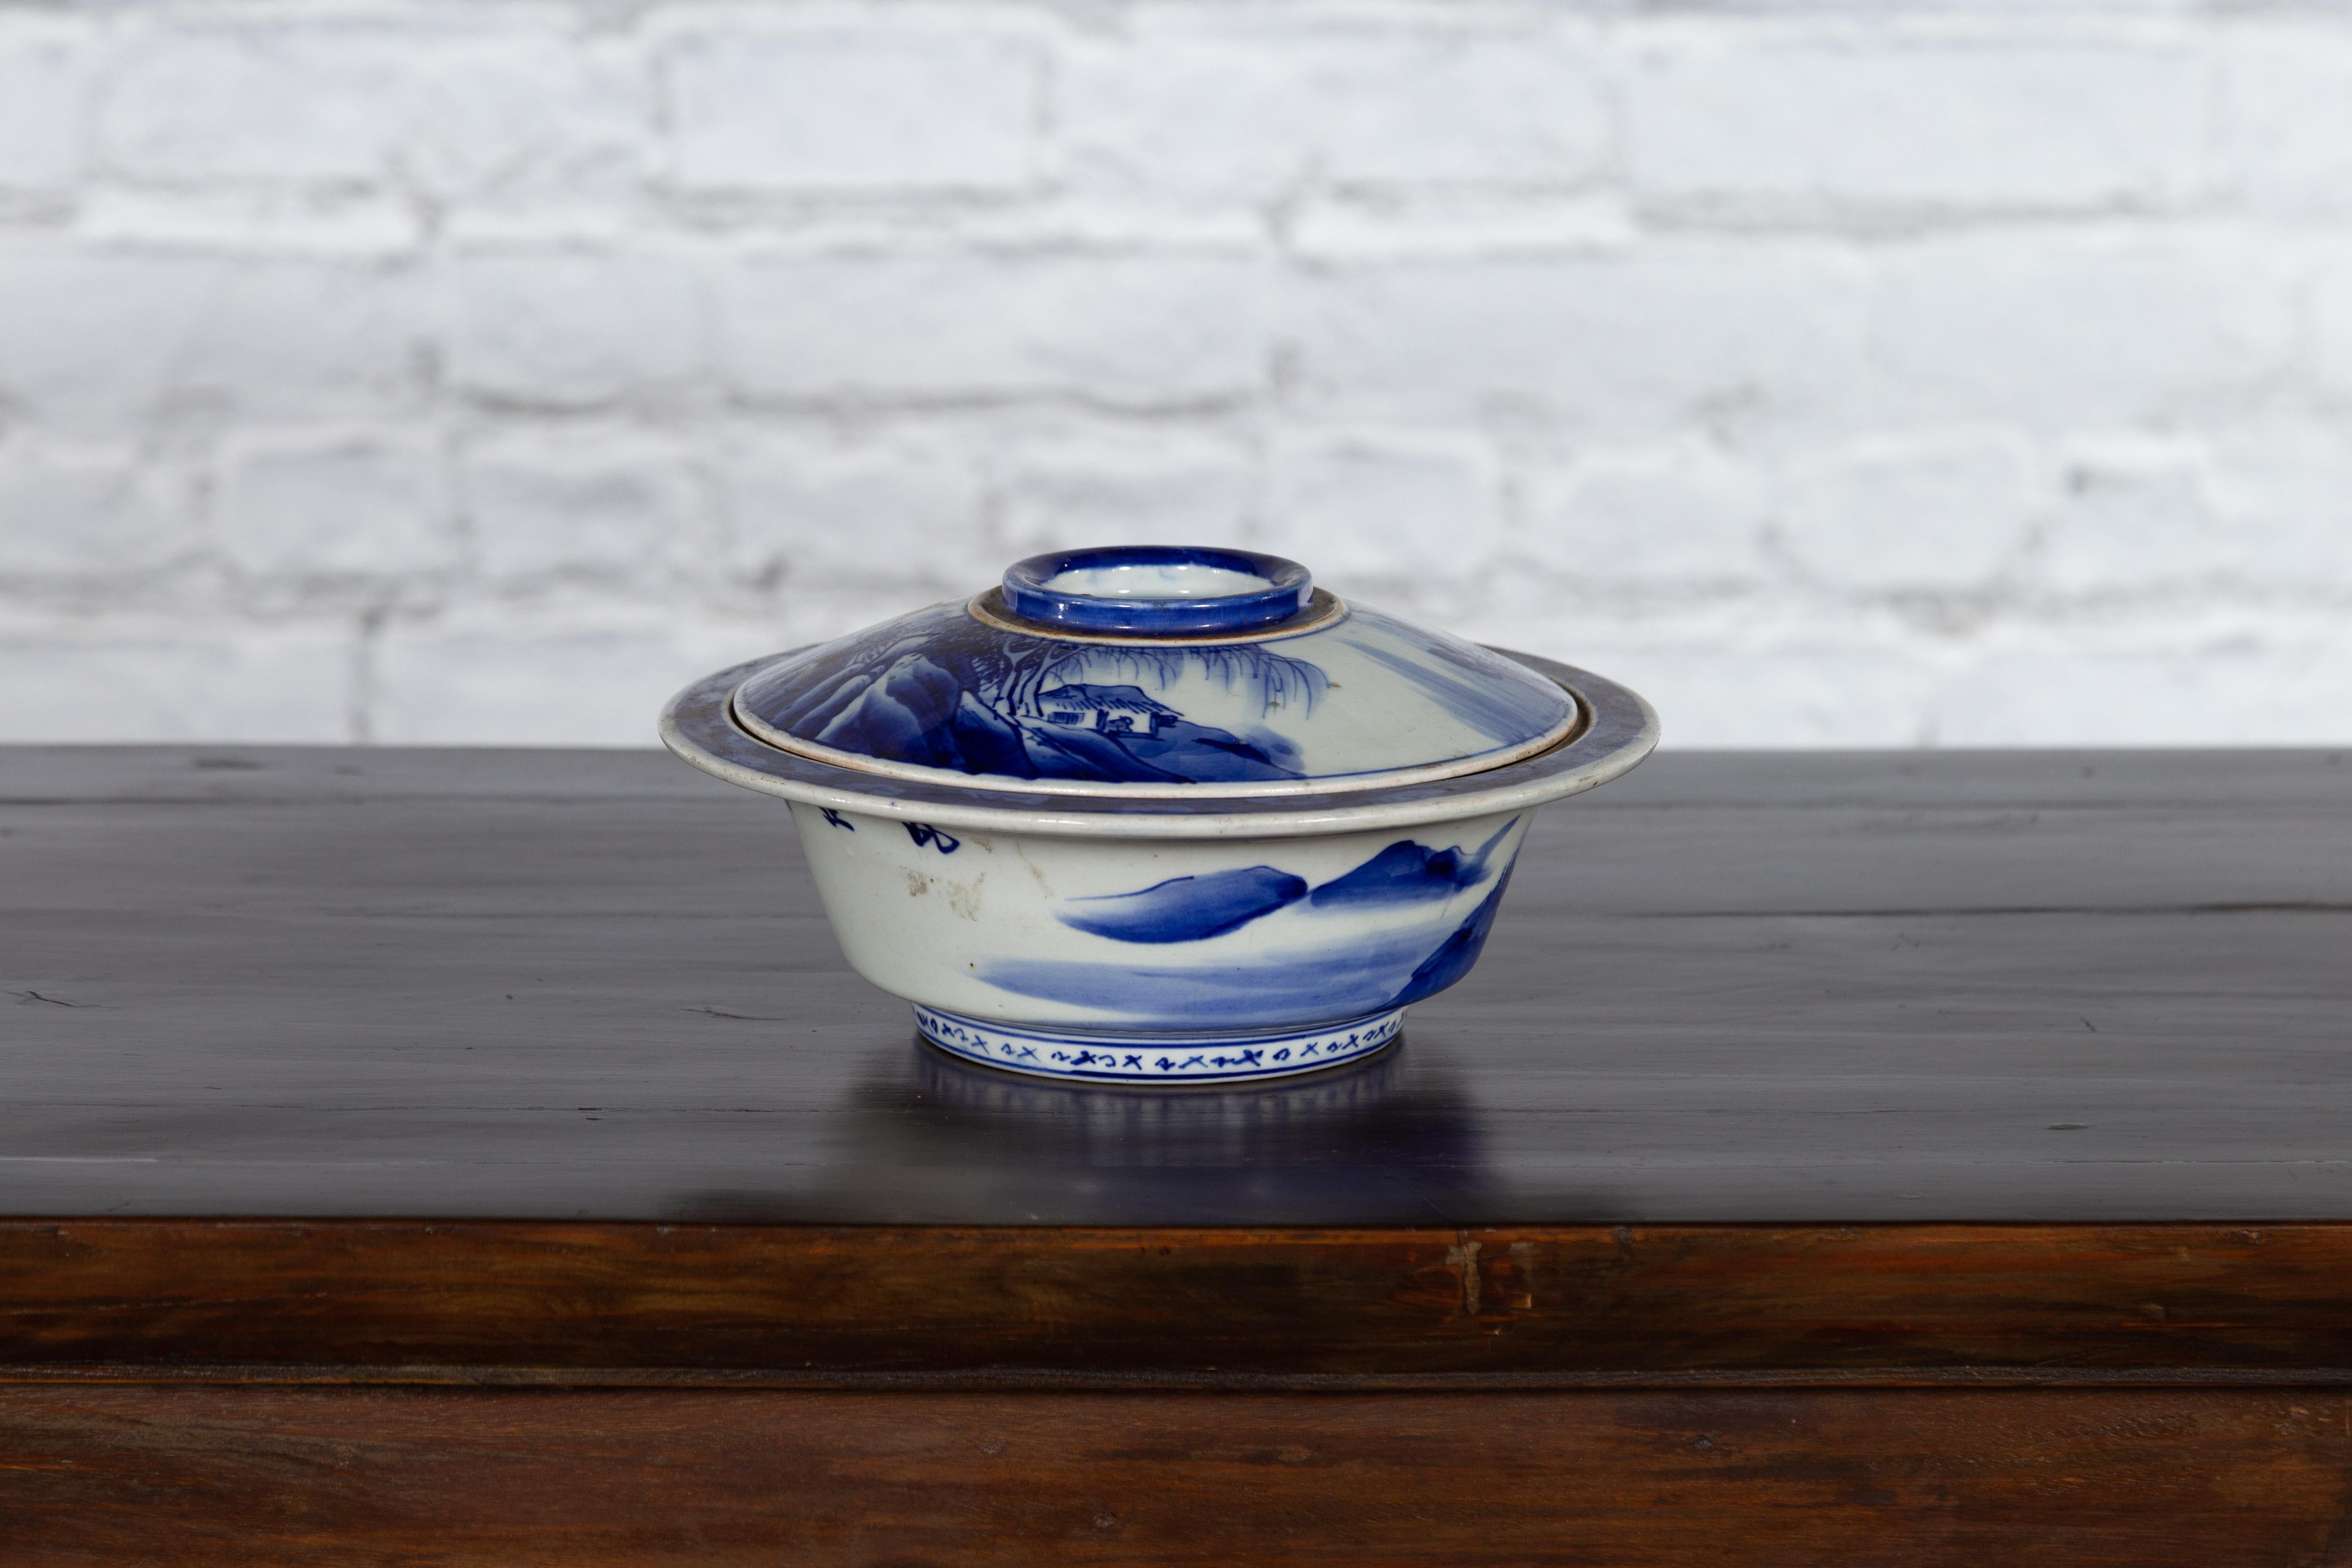 An antique Japanese blue and white hand-painted porcelain Seto ware vegetable bowl from the early 20th century, with landscape and calligraphy décor. Produced in one of the six ancient kilns of Japan, this porcelain vegetable bowl features a